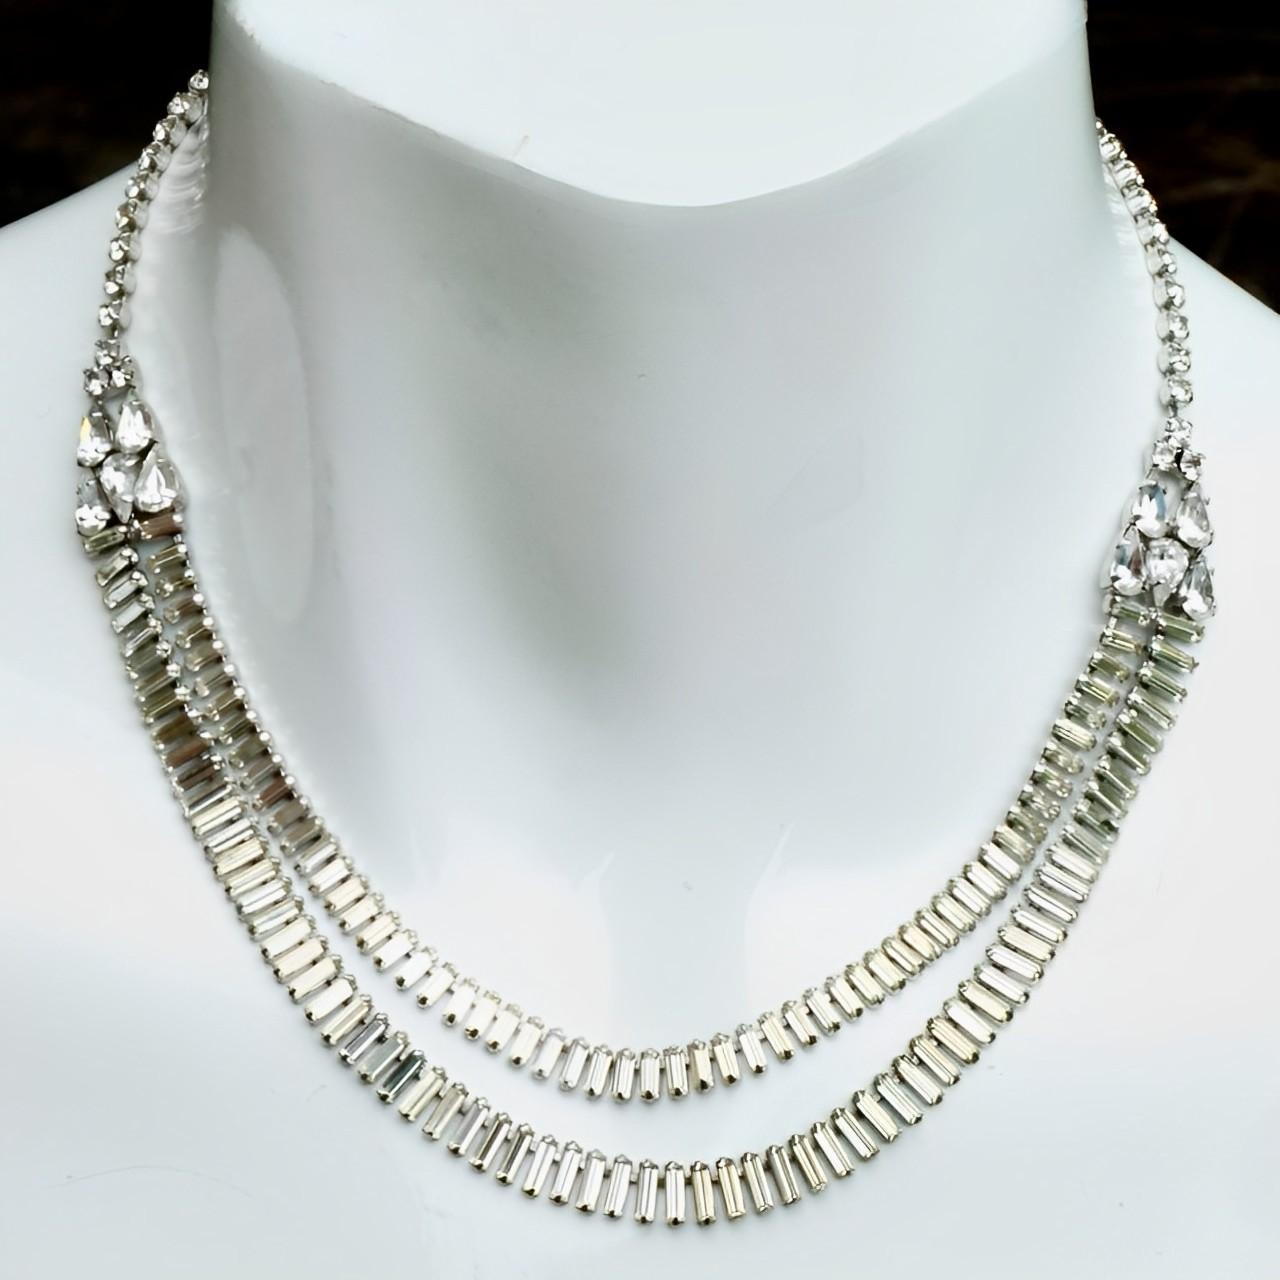 Beautiful silver plated necklace set with a double strand of baguette rhinestones. The strands are joined together by a cluster of marquise rhinestones and a single strand of round rhinestones. The necklace fastens with an adjustable hook. There is